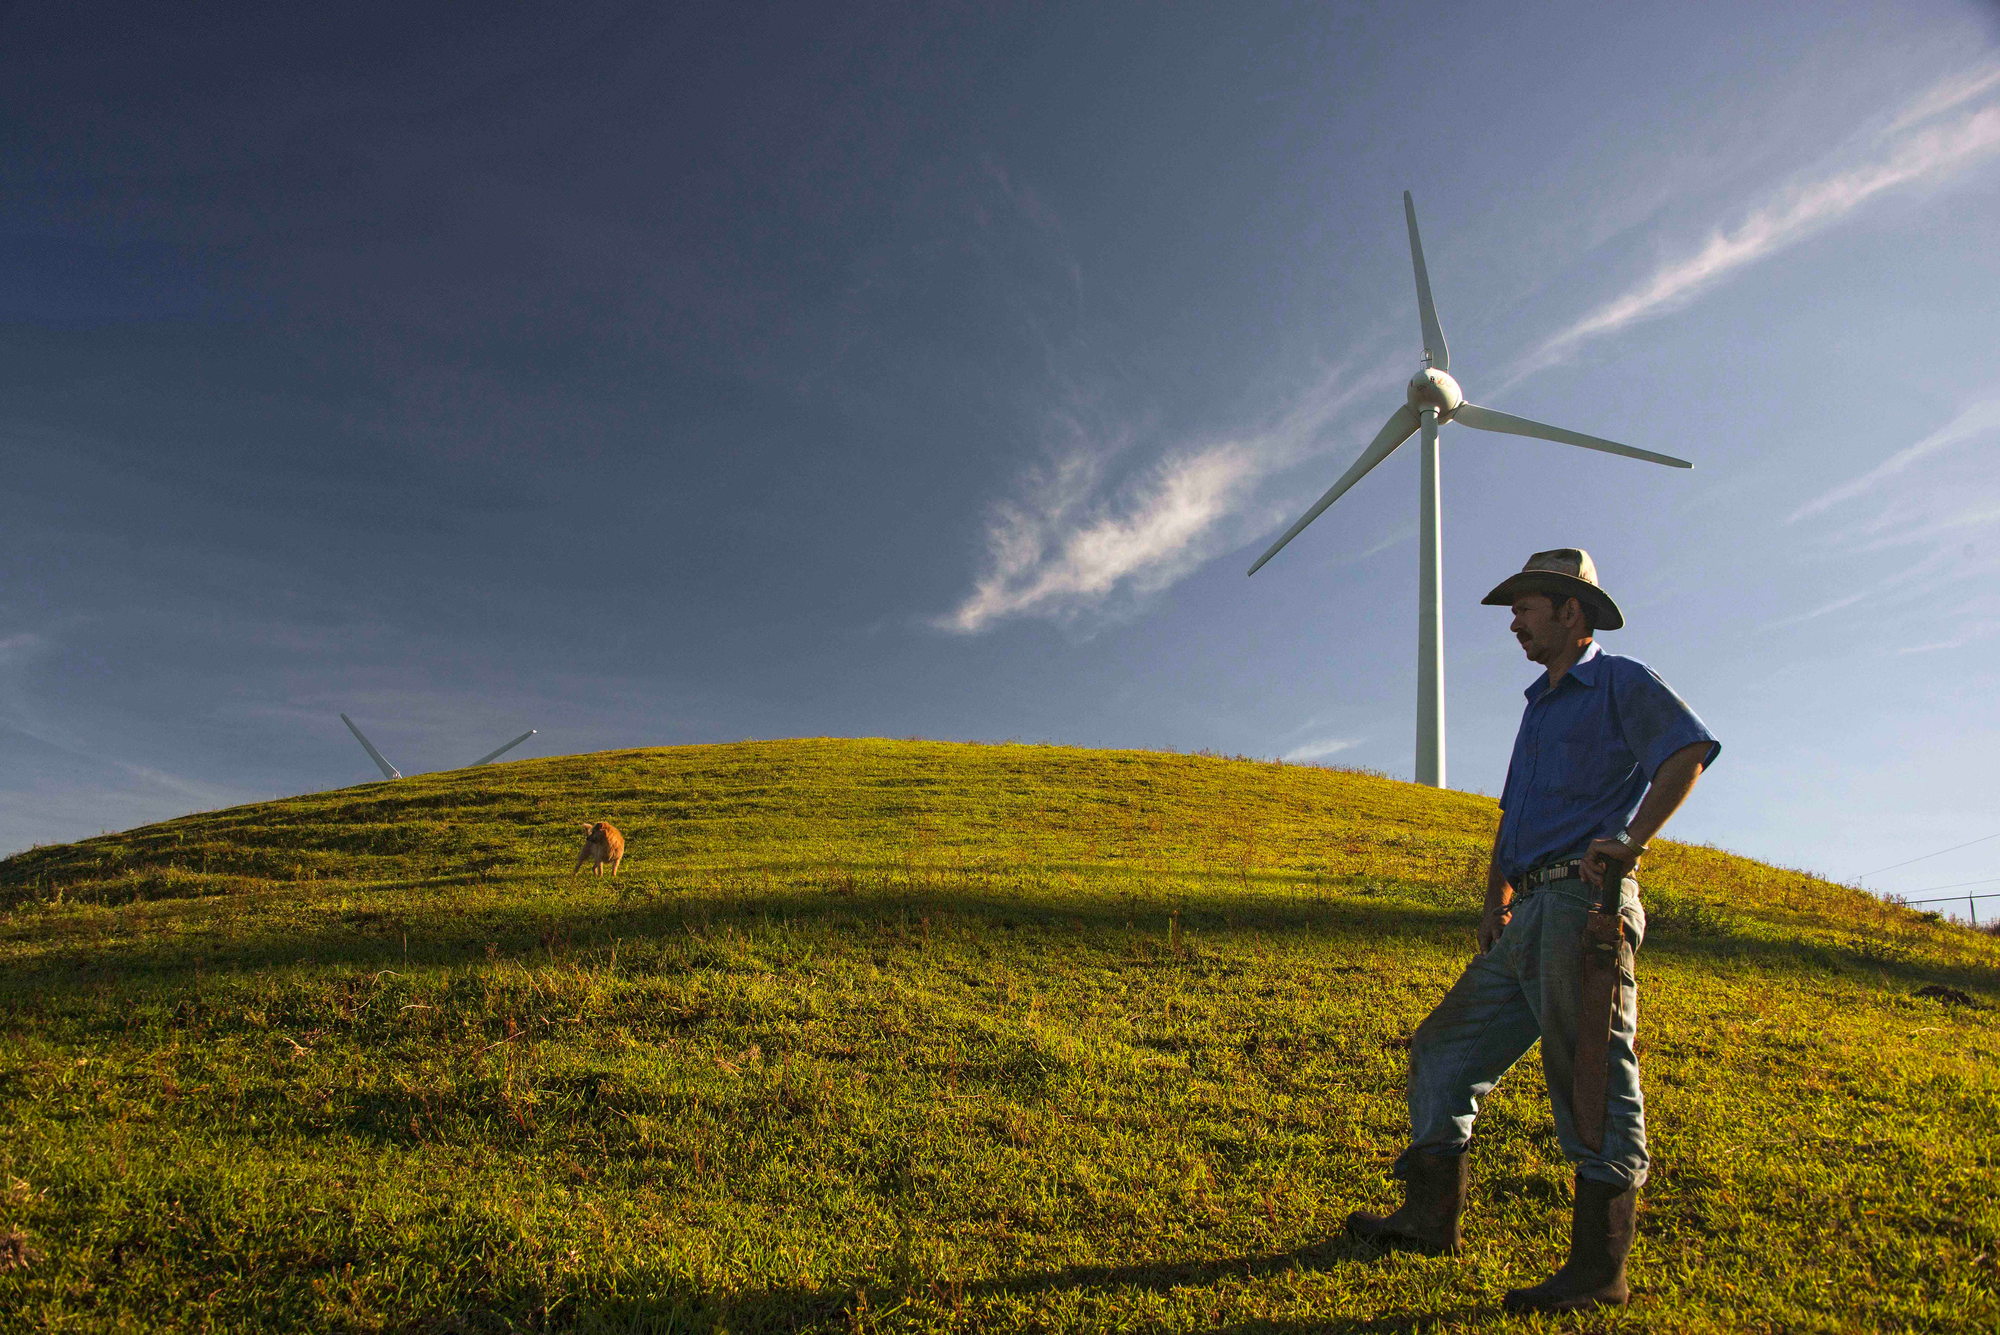 Wind turbines in a scenic Costa Rican landscape, symbolizing the growth potential for wind energy in the country.